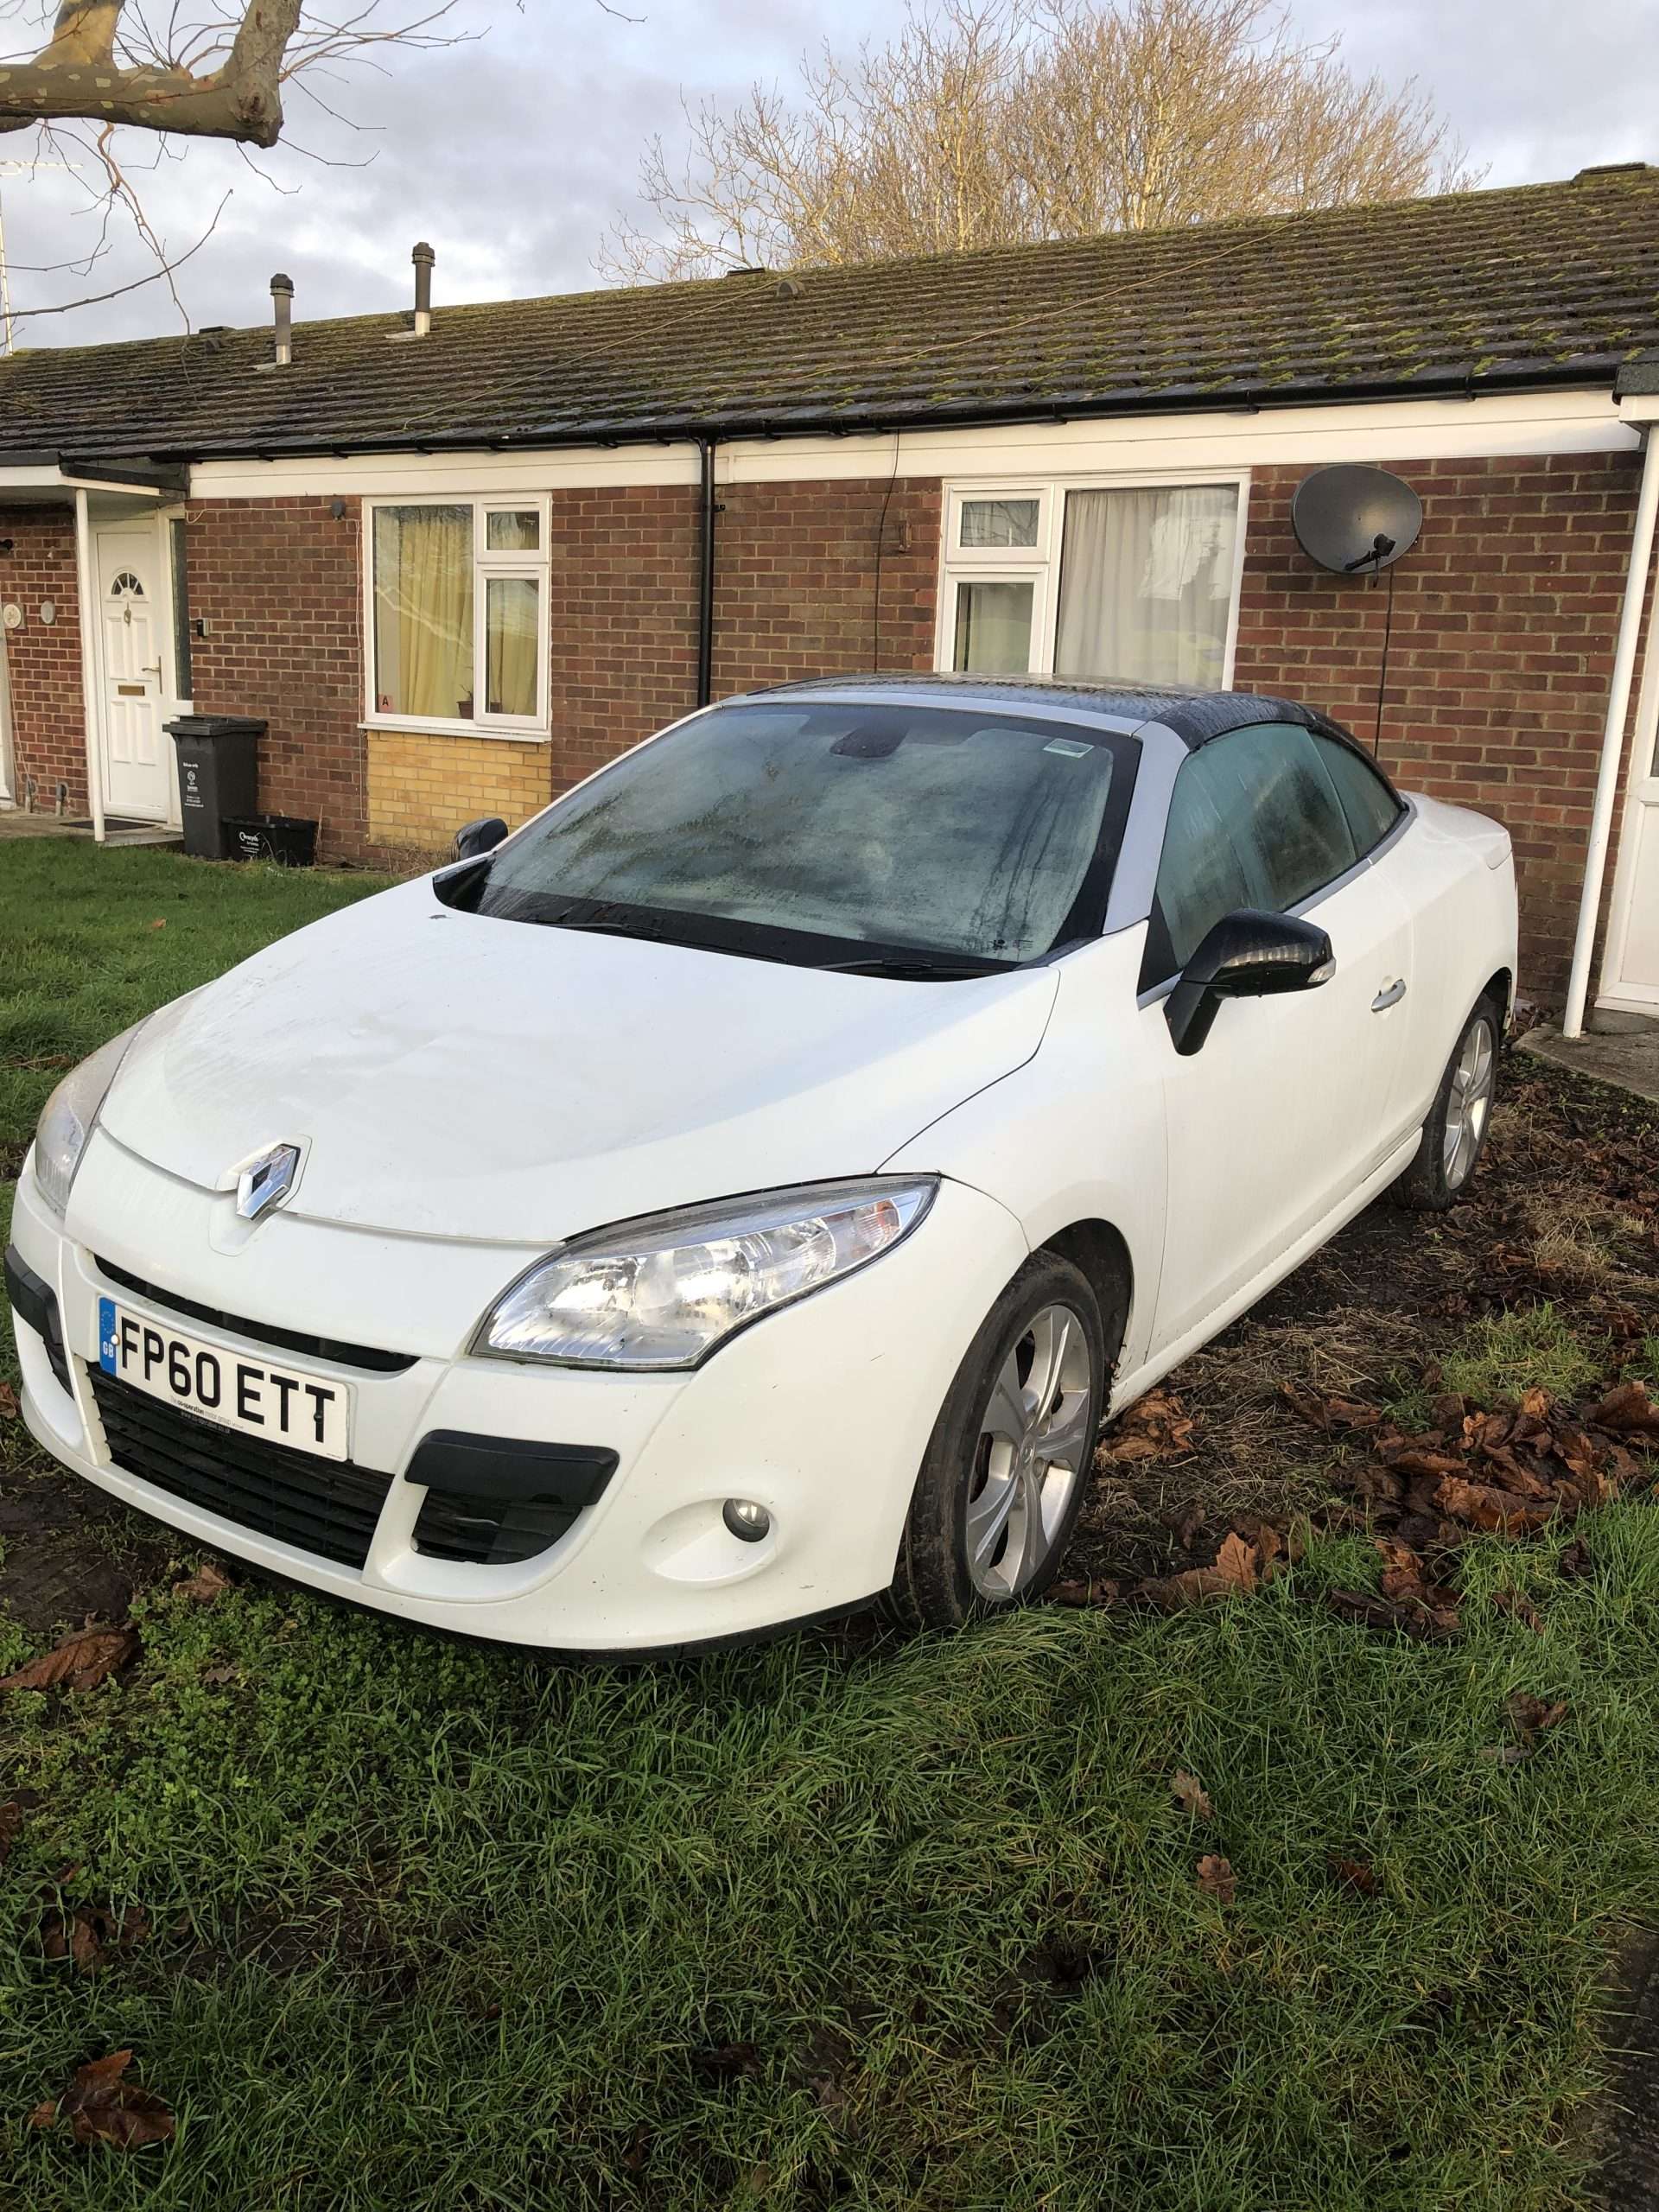 2010 Renault Megane Convertible Cars for sale in Swindon Wiltshire